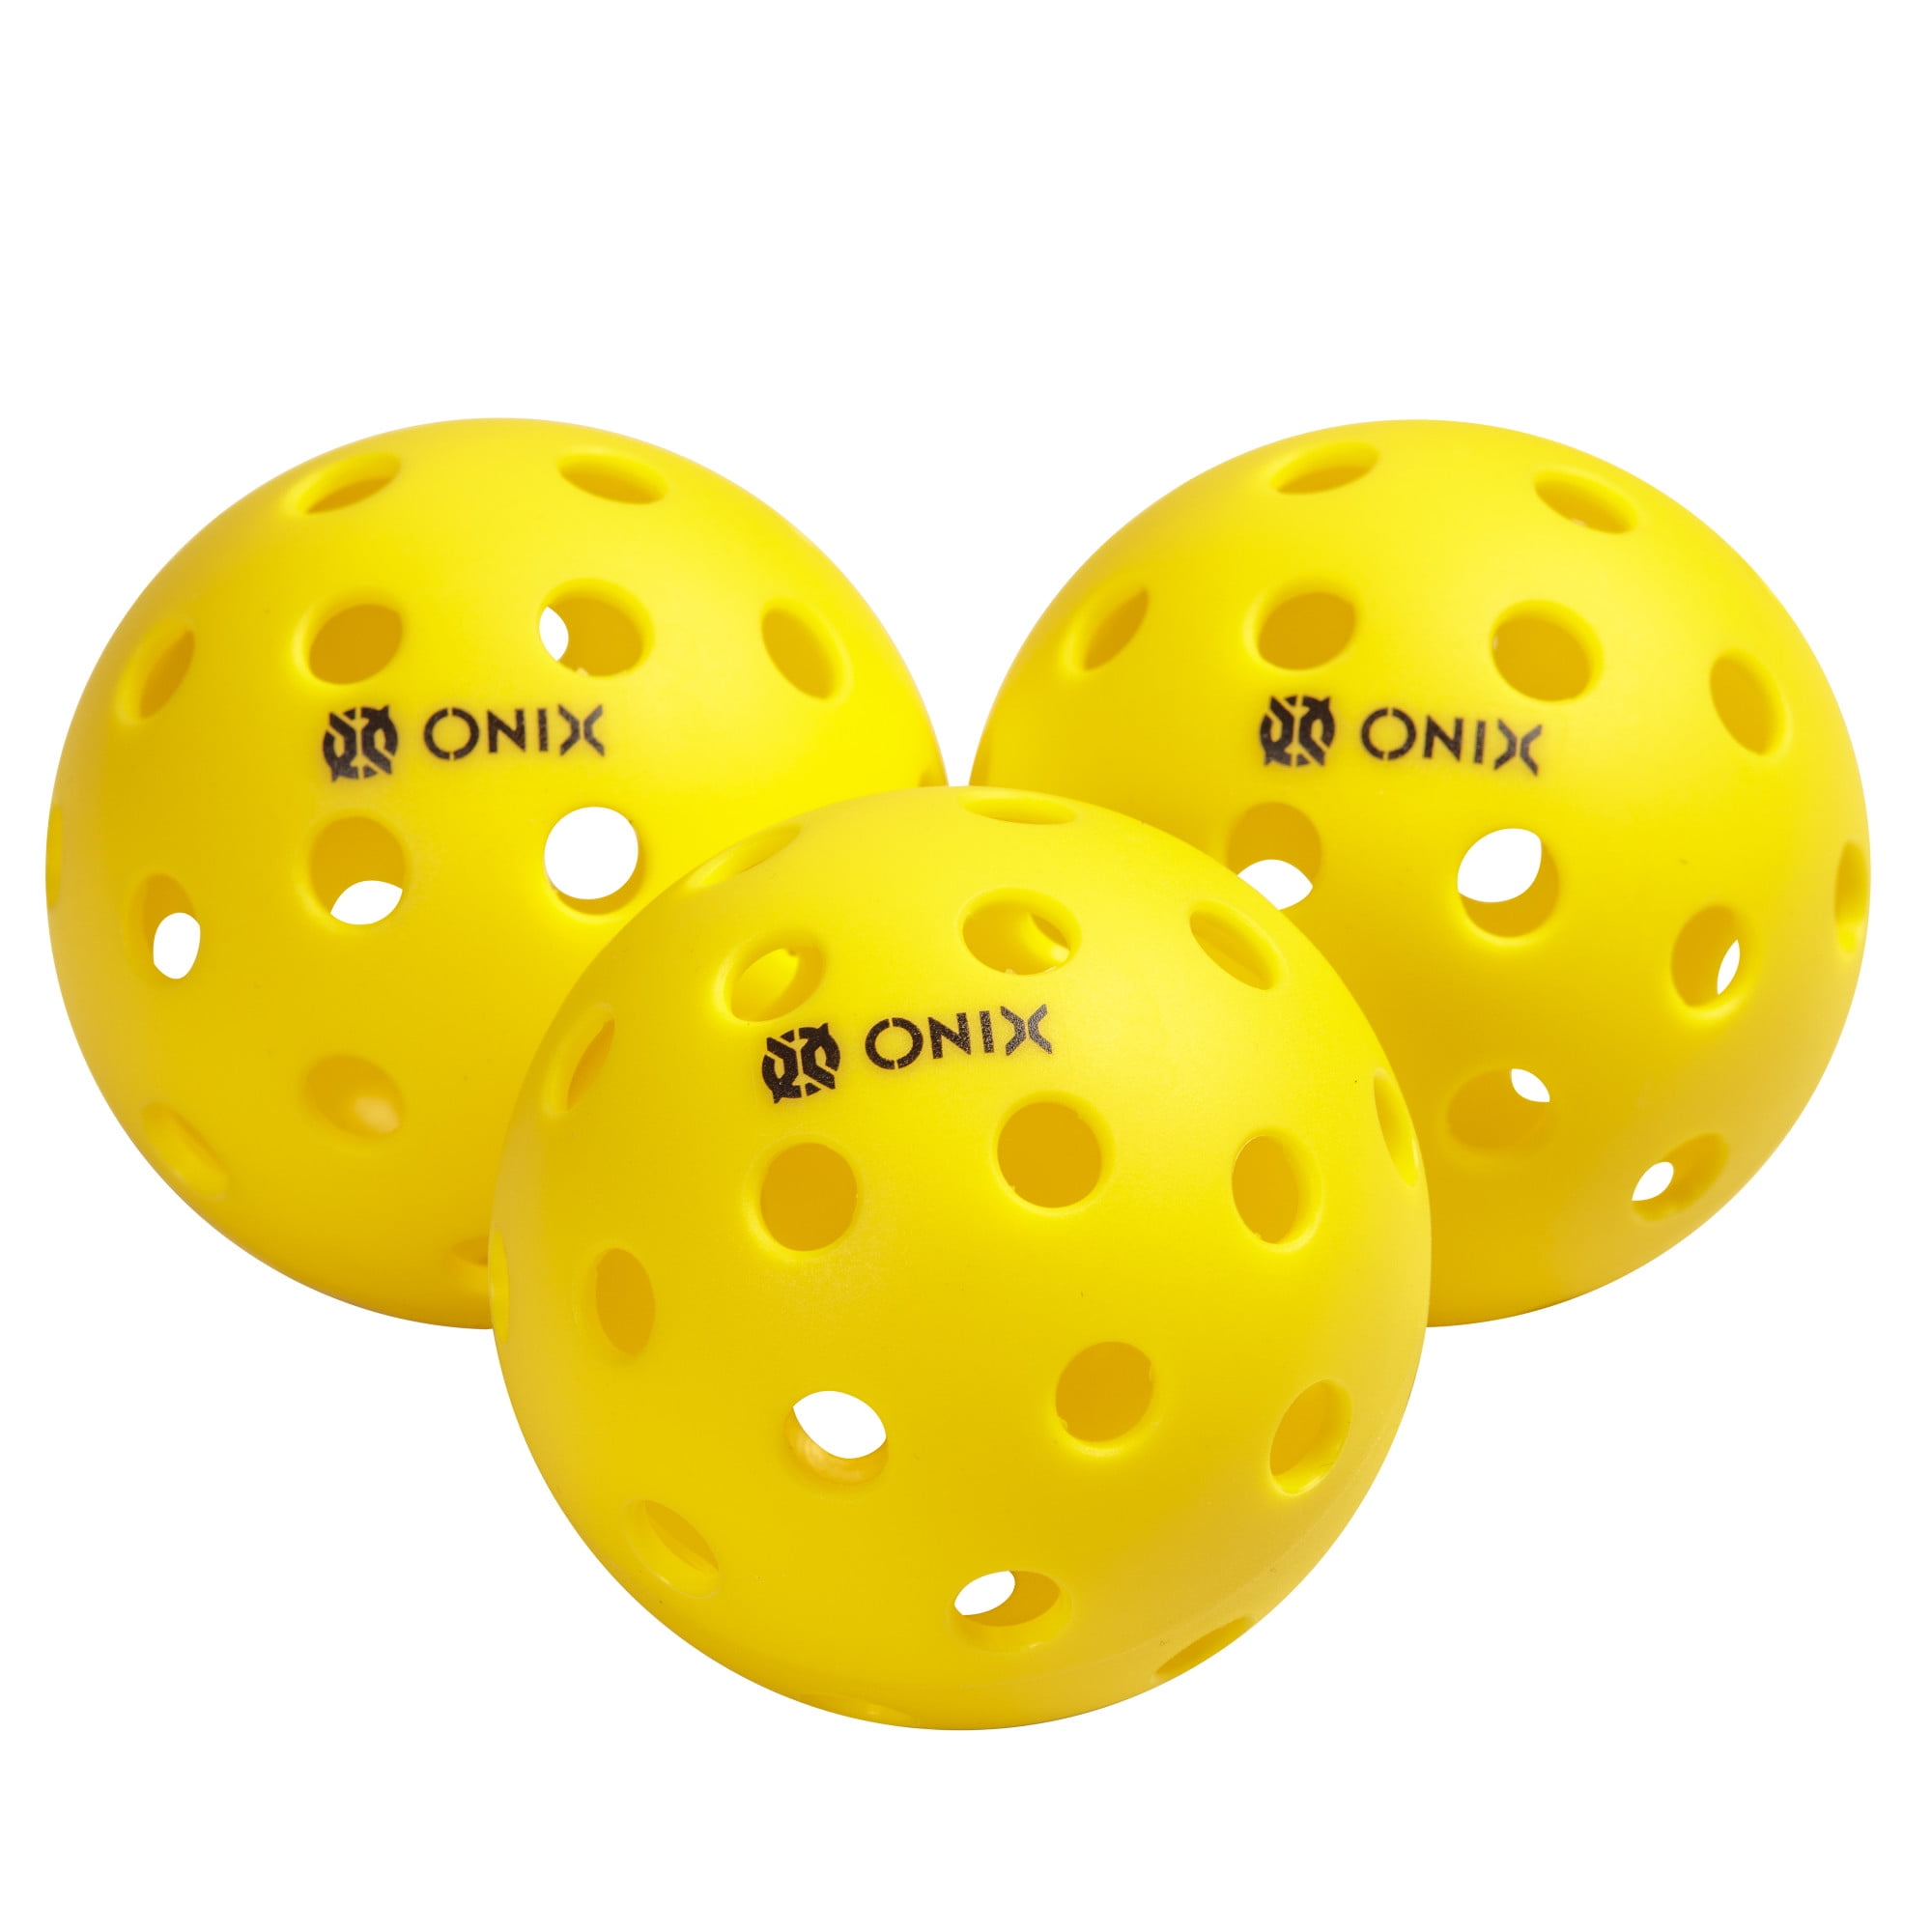 Recruit By Onix Pure Indoor Pickleballs 3 Packs of 3 NEW 9 Pickle balls Total 